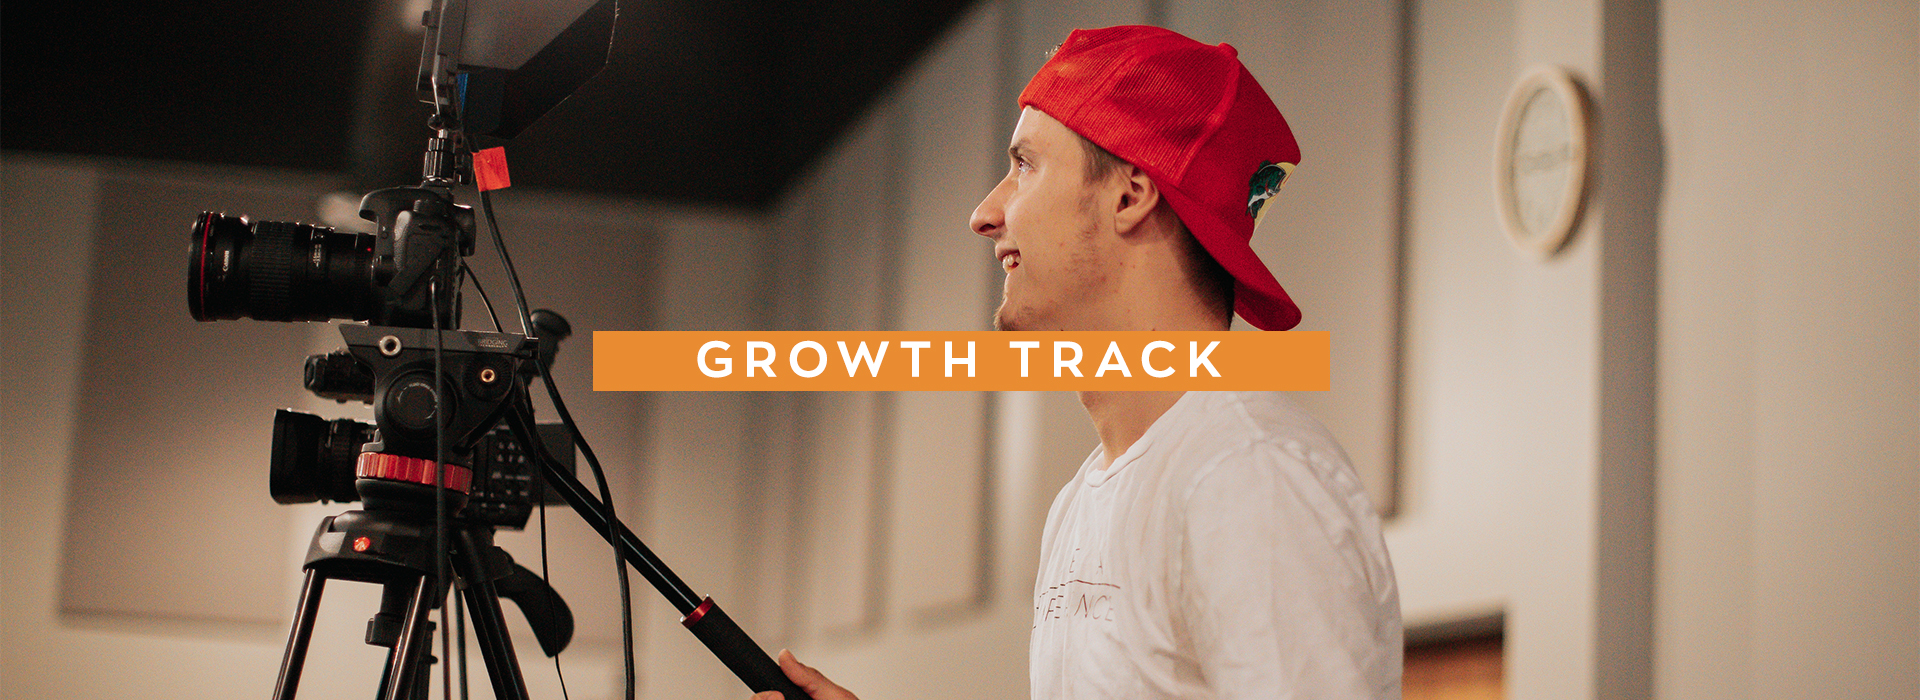 Growth Track Banner